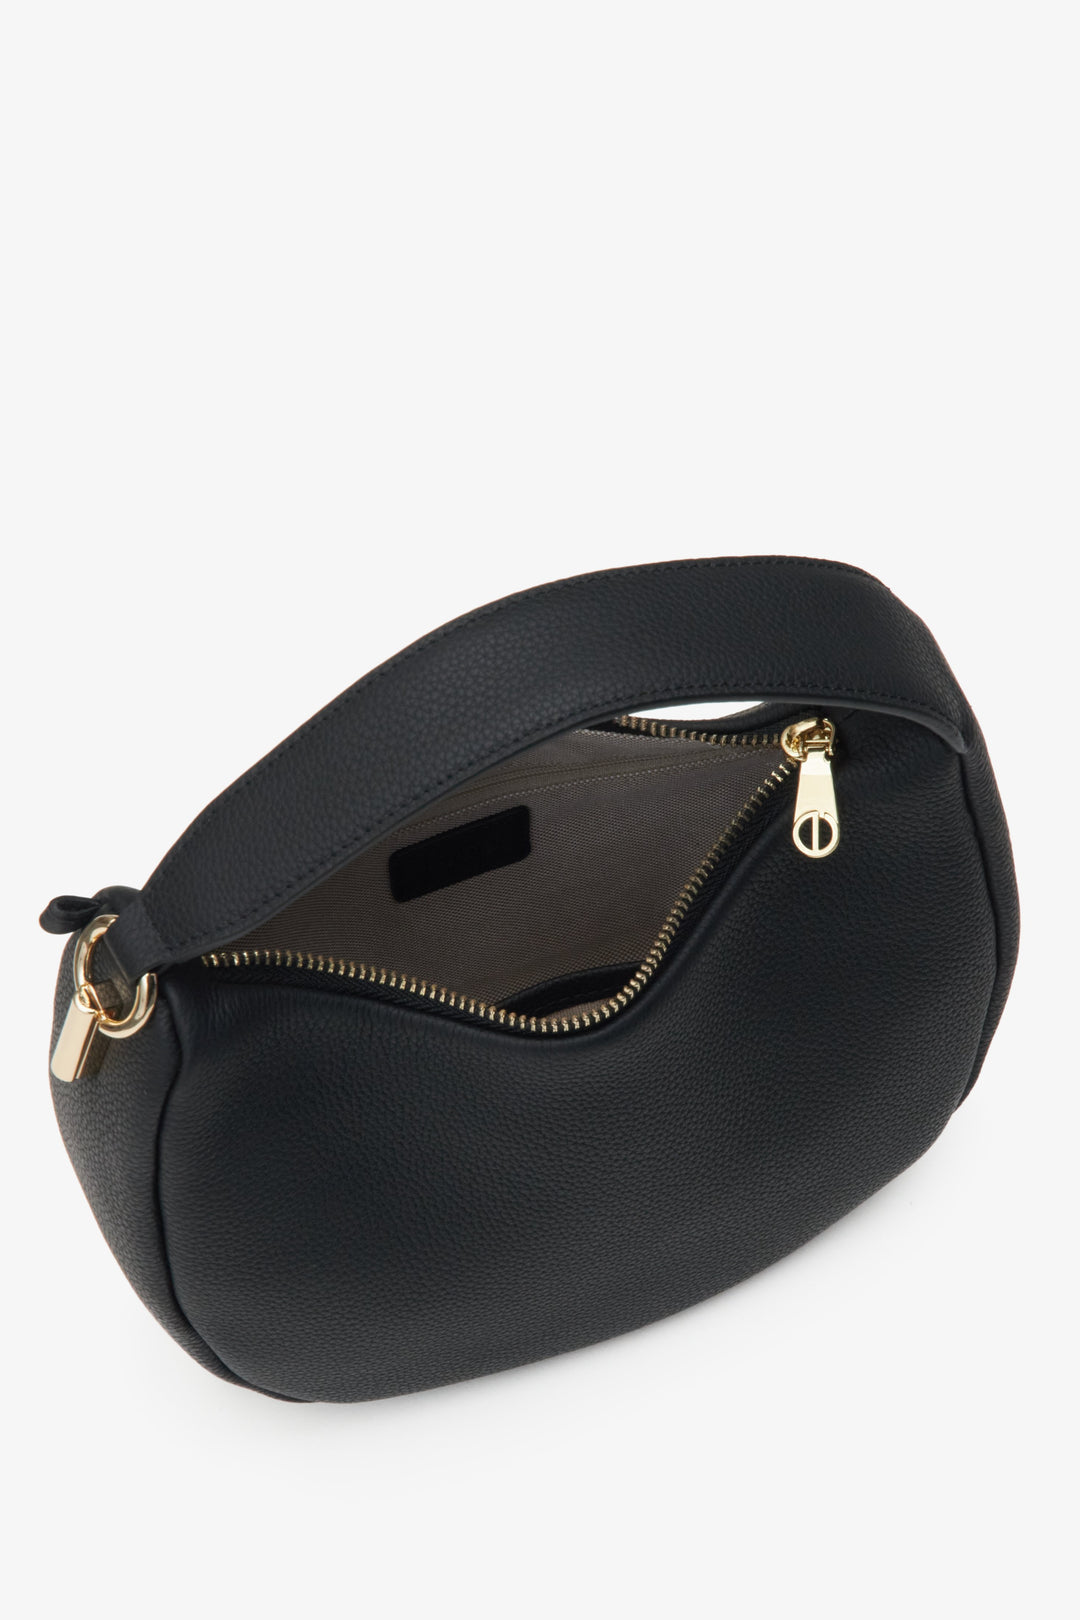 Close-up of the interior of the black leather women's crescent-shaped handbag by Estro.